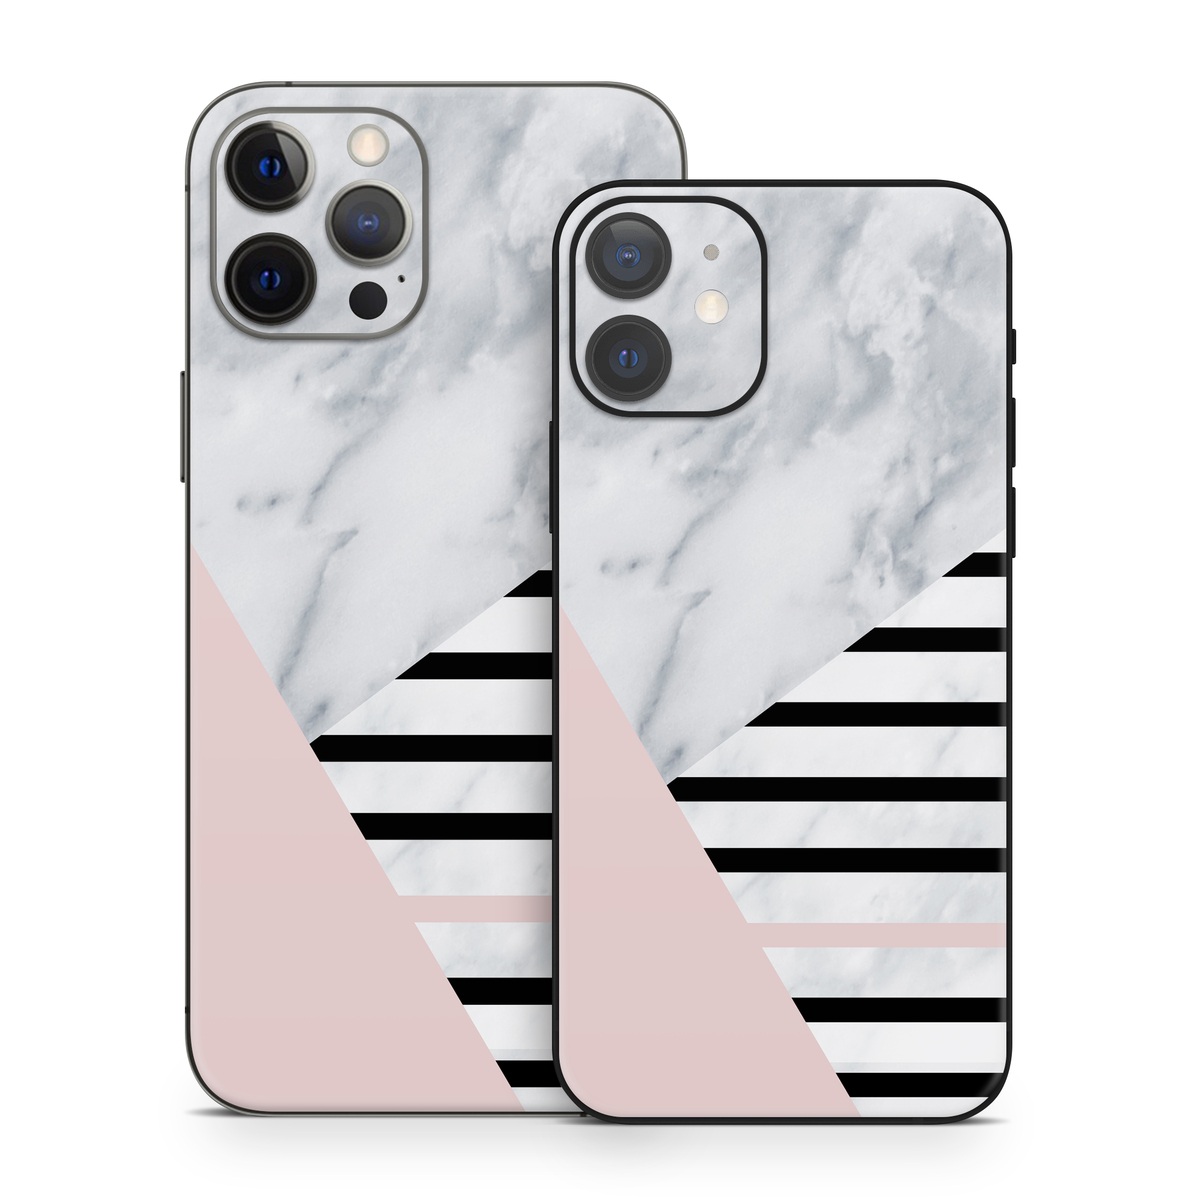 iPhone 12 Series Skin design of White, Line, Architecture, Stairs, Parallel, with gray, black, white, pink colors